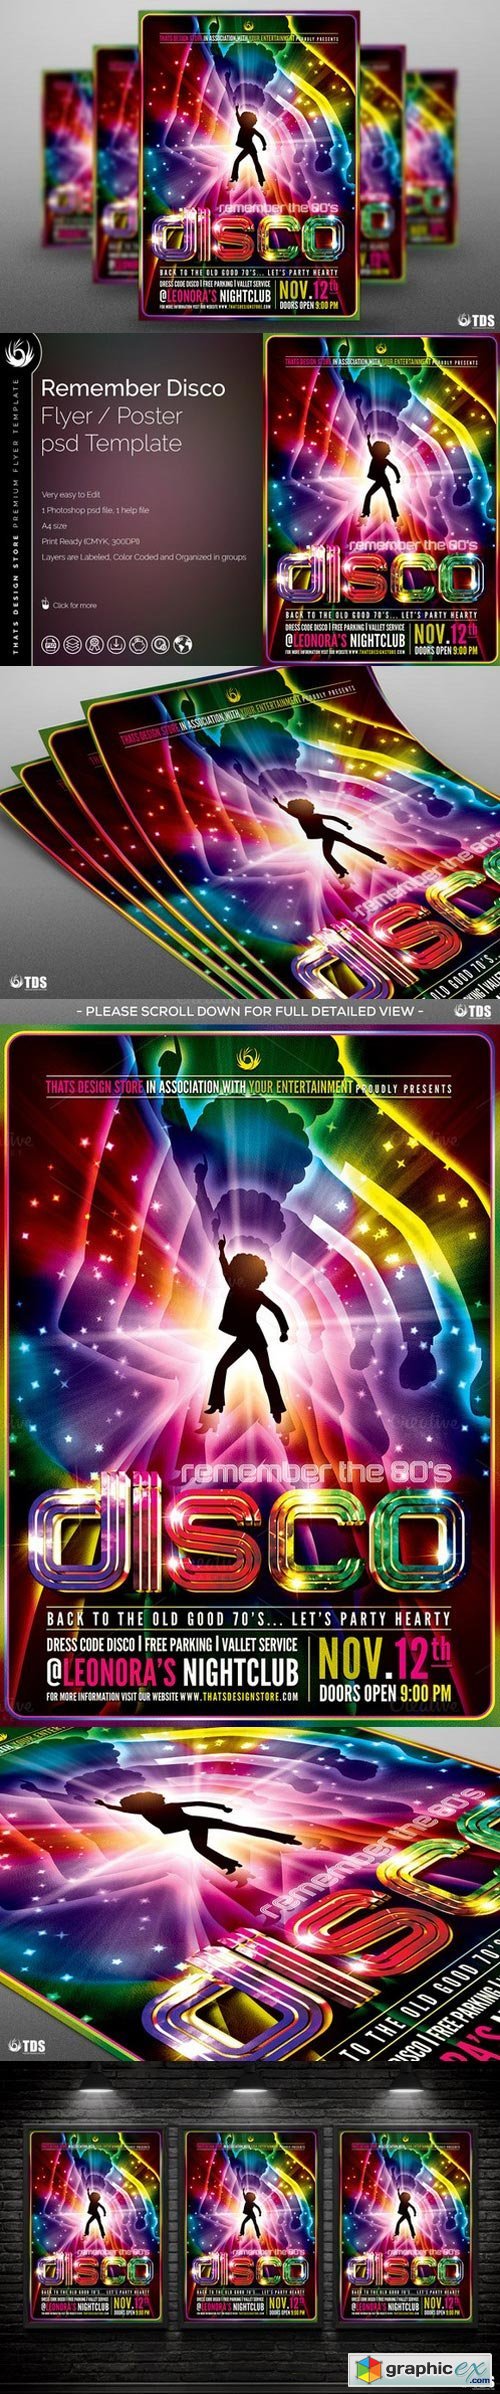 Remember Disco Flyer Template